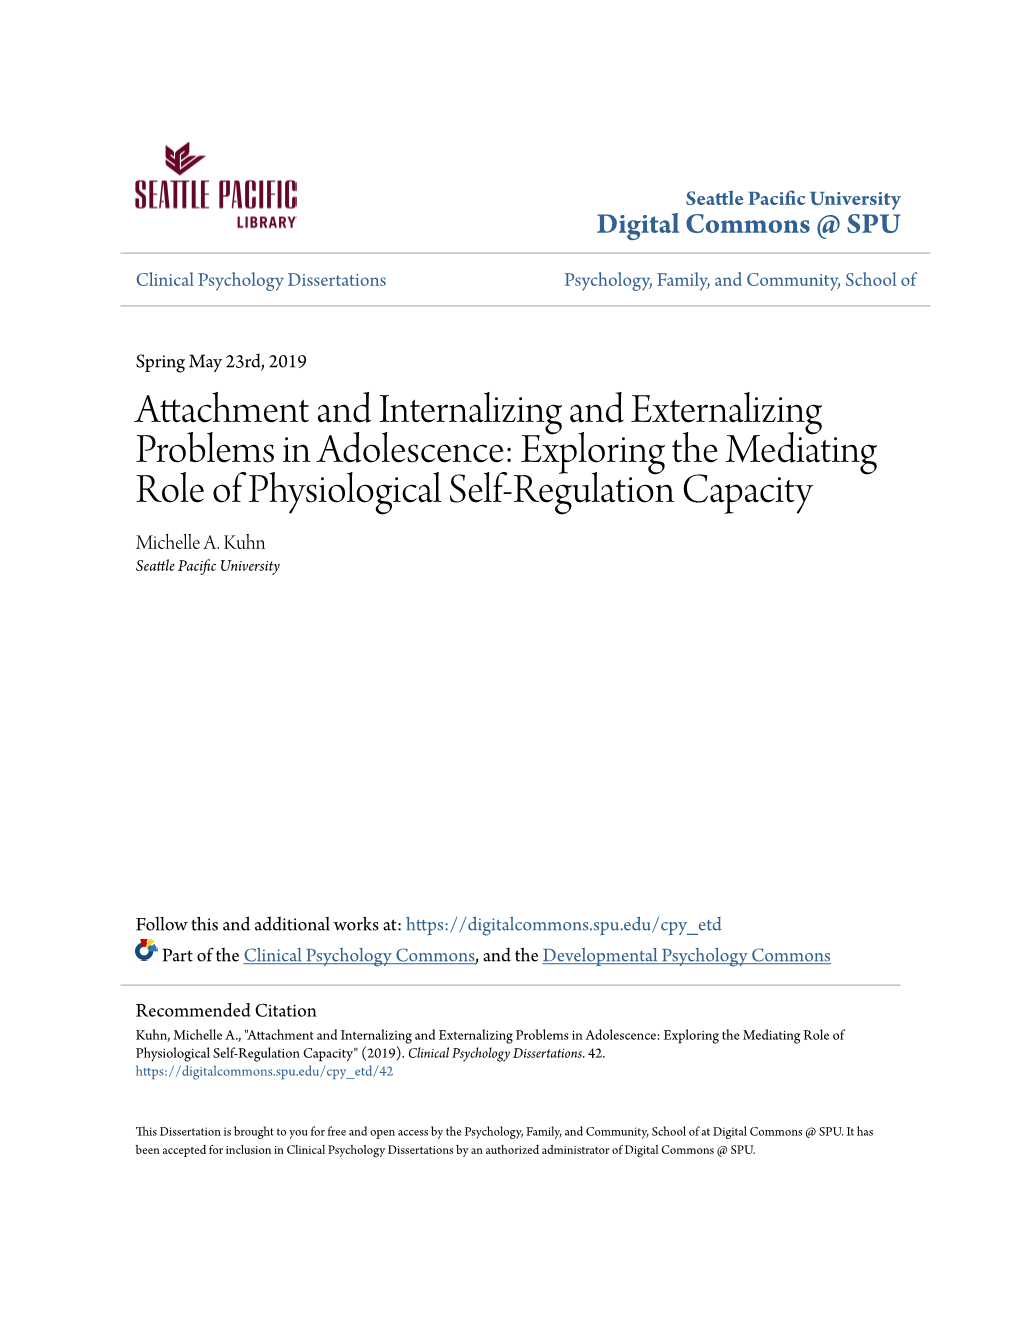 Attachment and Internalizing and Externalizing Problems in Adolescence: Exploring the Mediating Role of Physiological Self-Regulation Capacity Michelle A